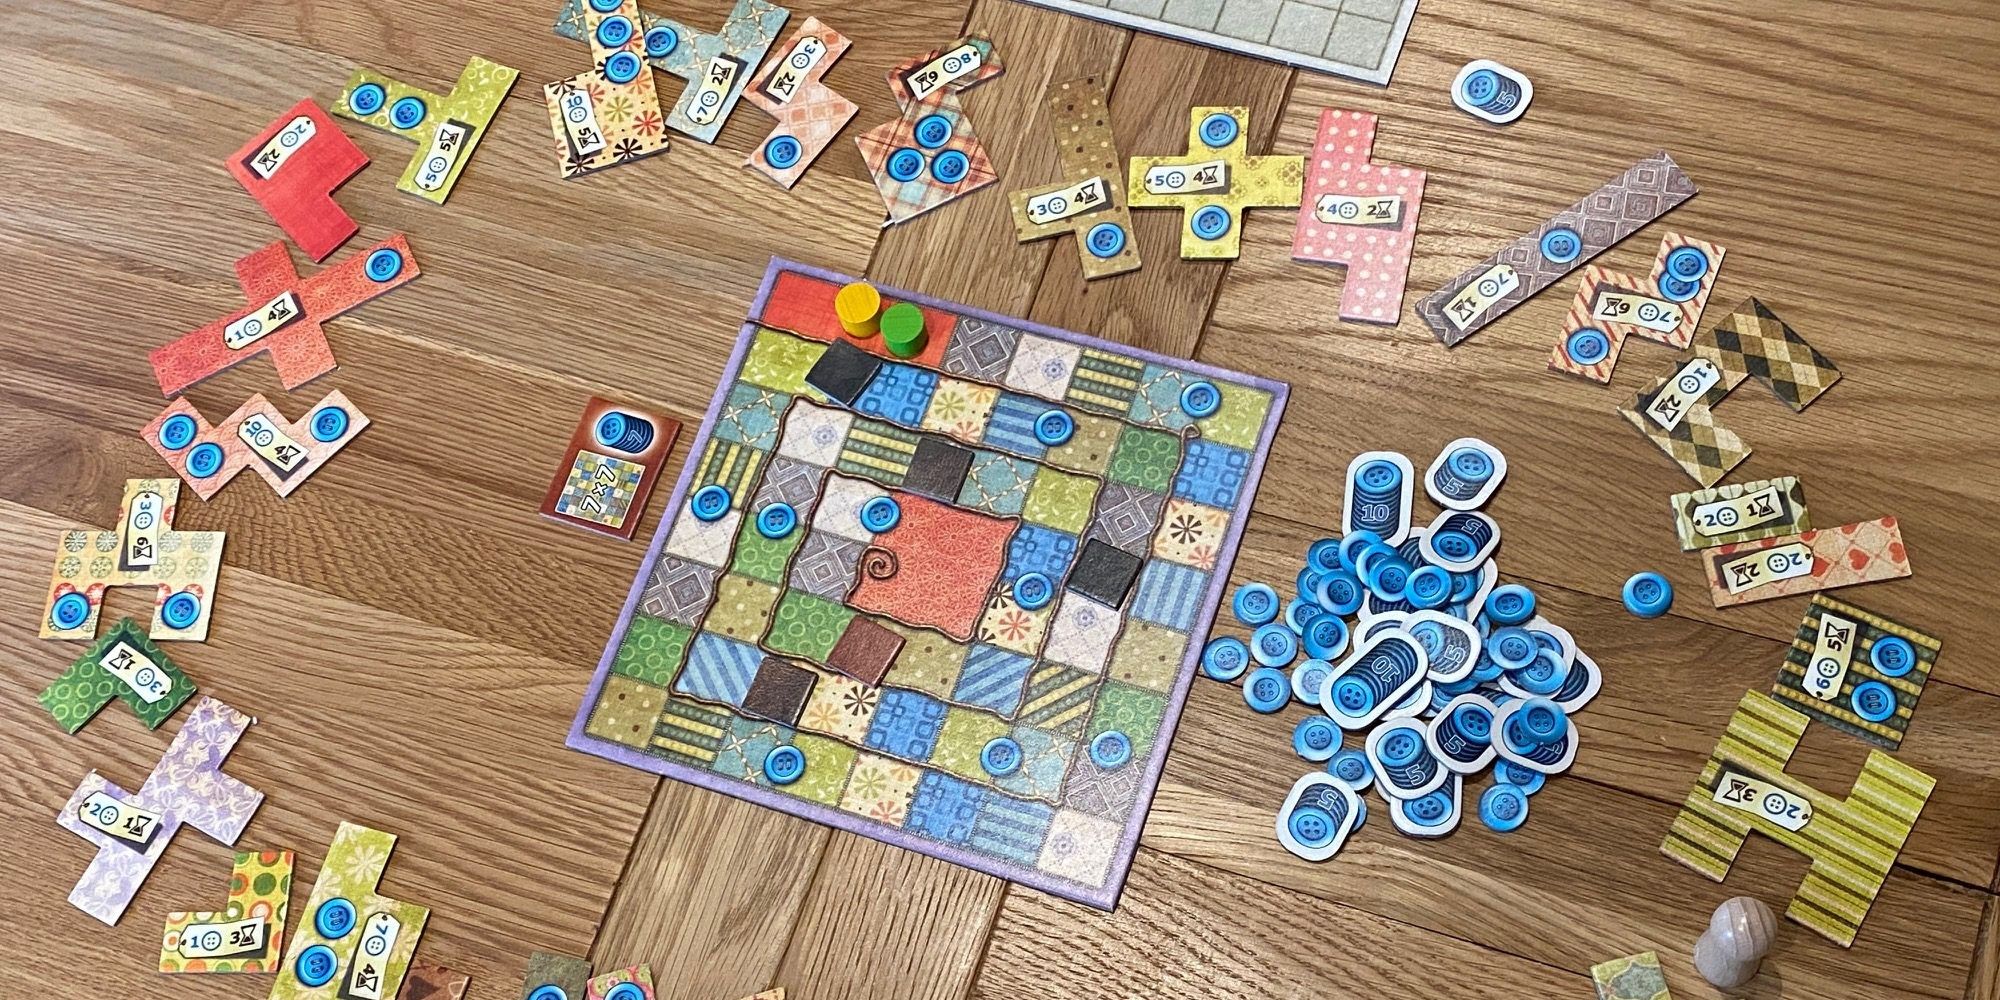 Patchwork Board Game Board and pieces scattered on wooden table